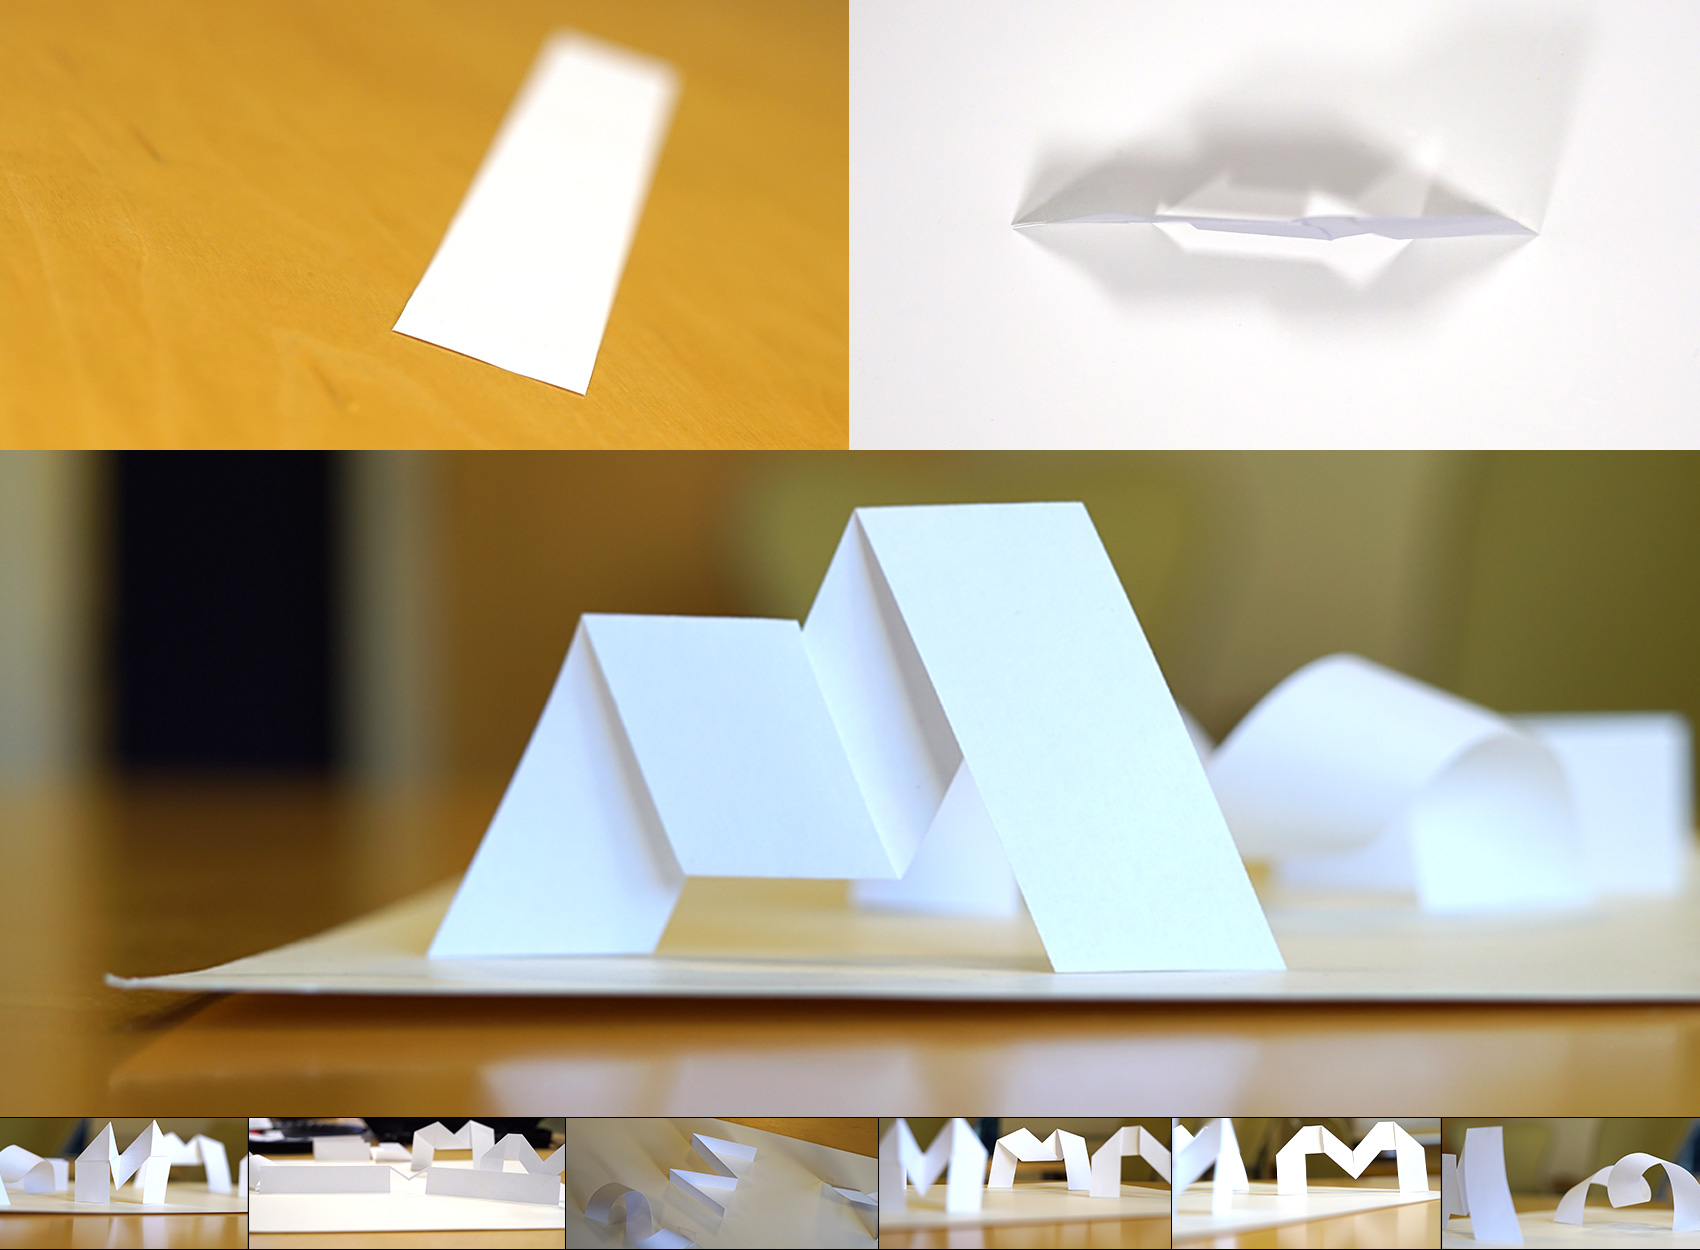 Photographs of folded paper M's